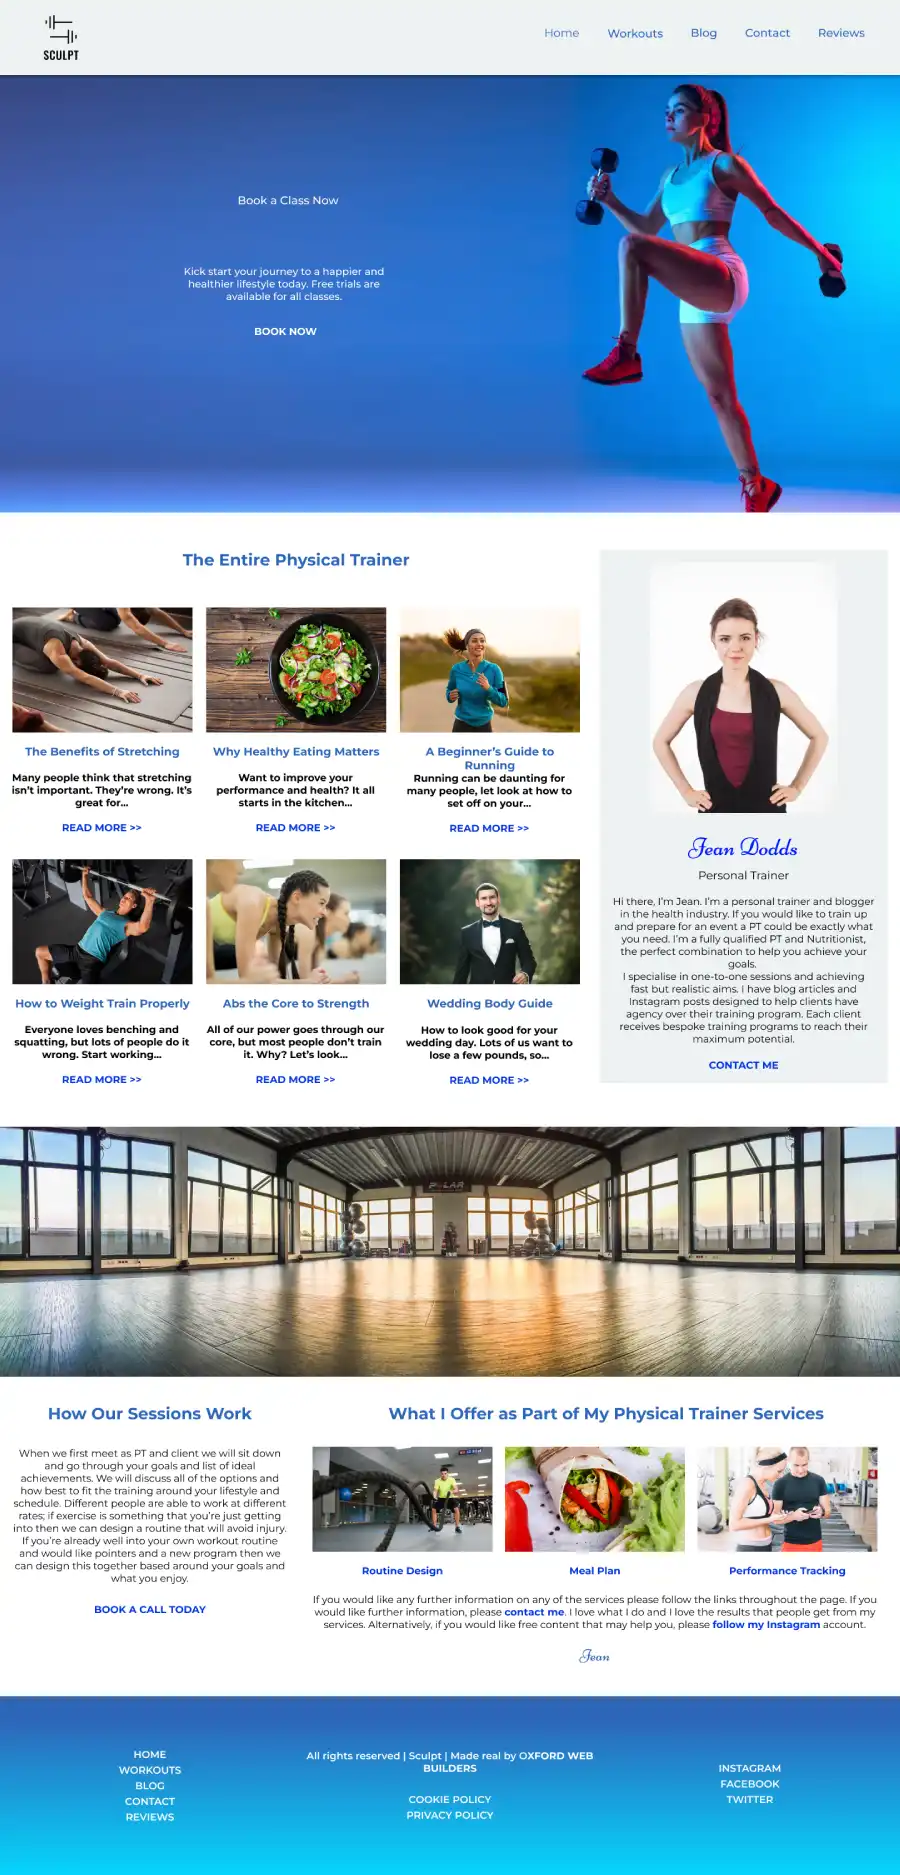 The homepage for the web design for Dodds Personal Training website. This uses the colour theme of blue and has many modern images.